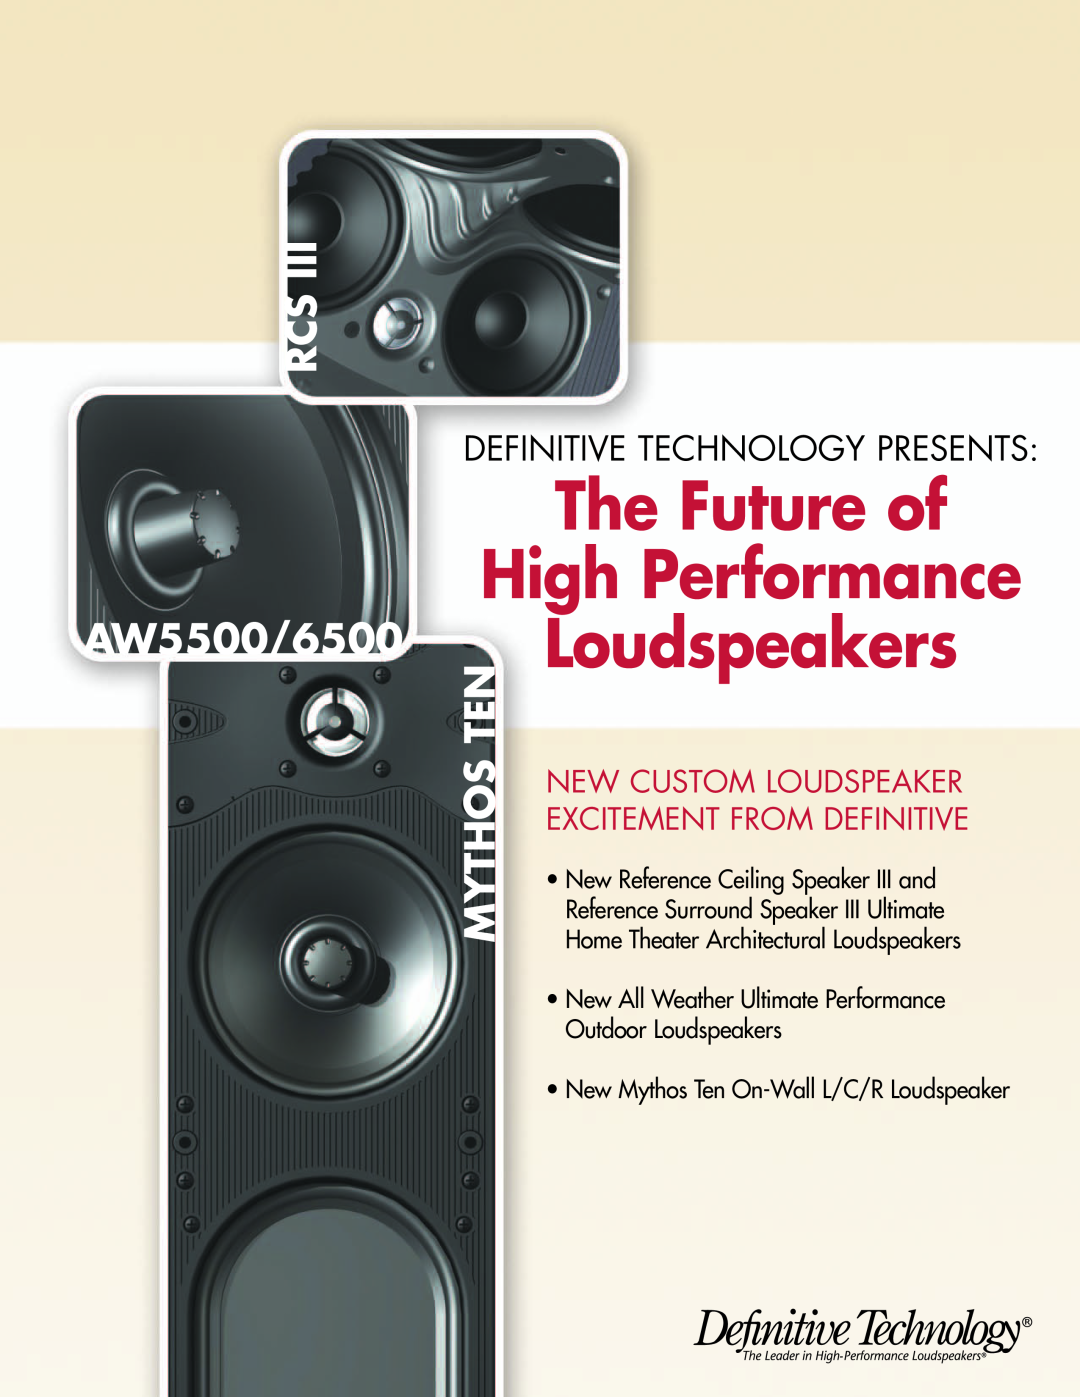 Definitive Technology AW6500 manual The Future of High Performance Loudspeakers, RCS AW5500/6500, New Custom Loudspeaker 